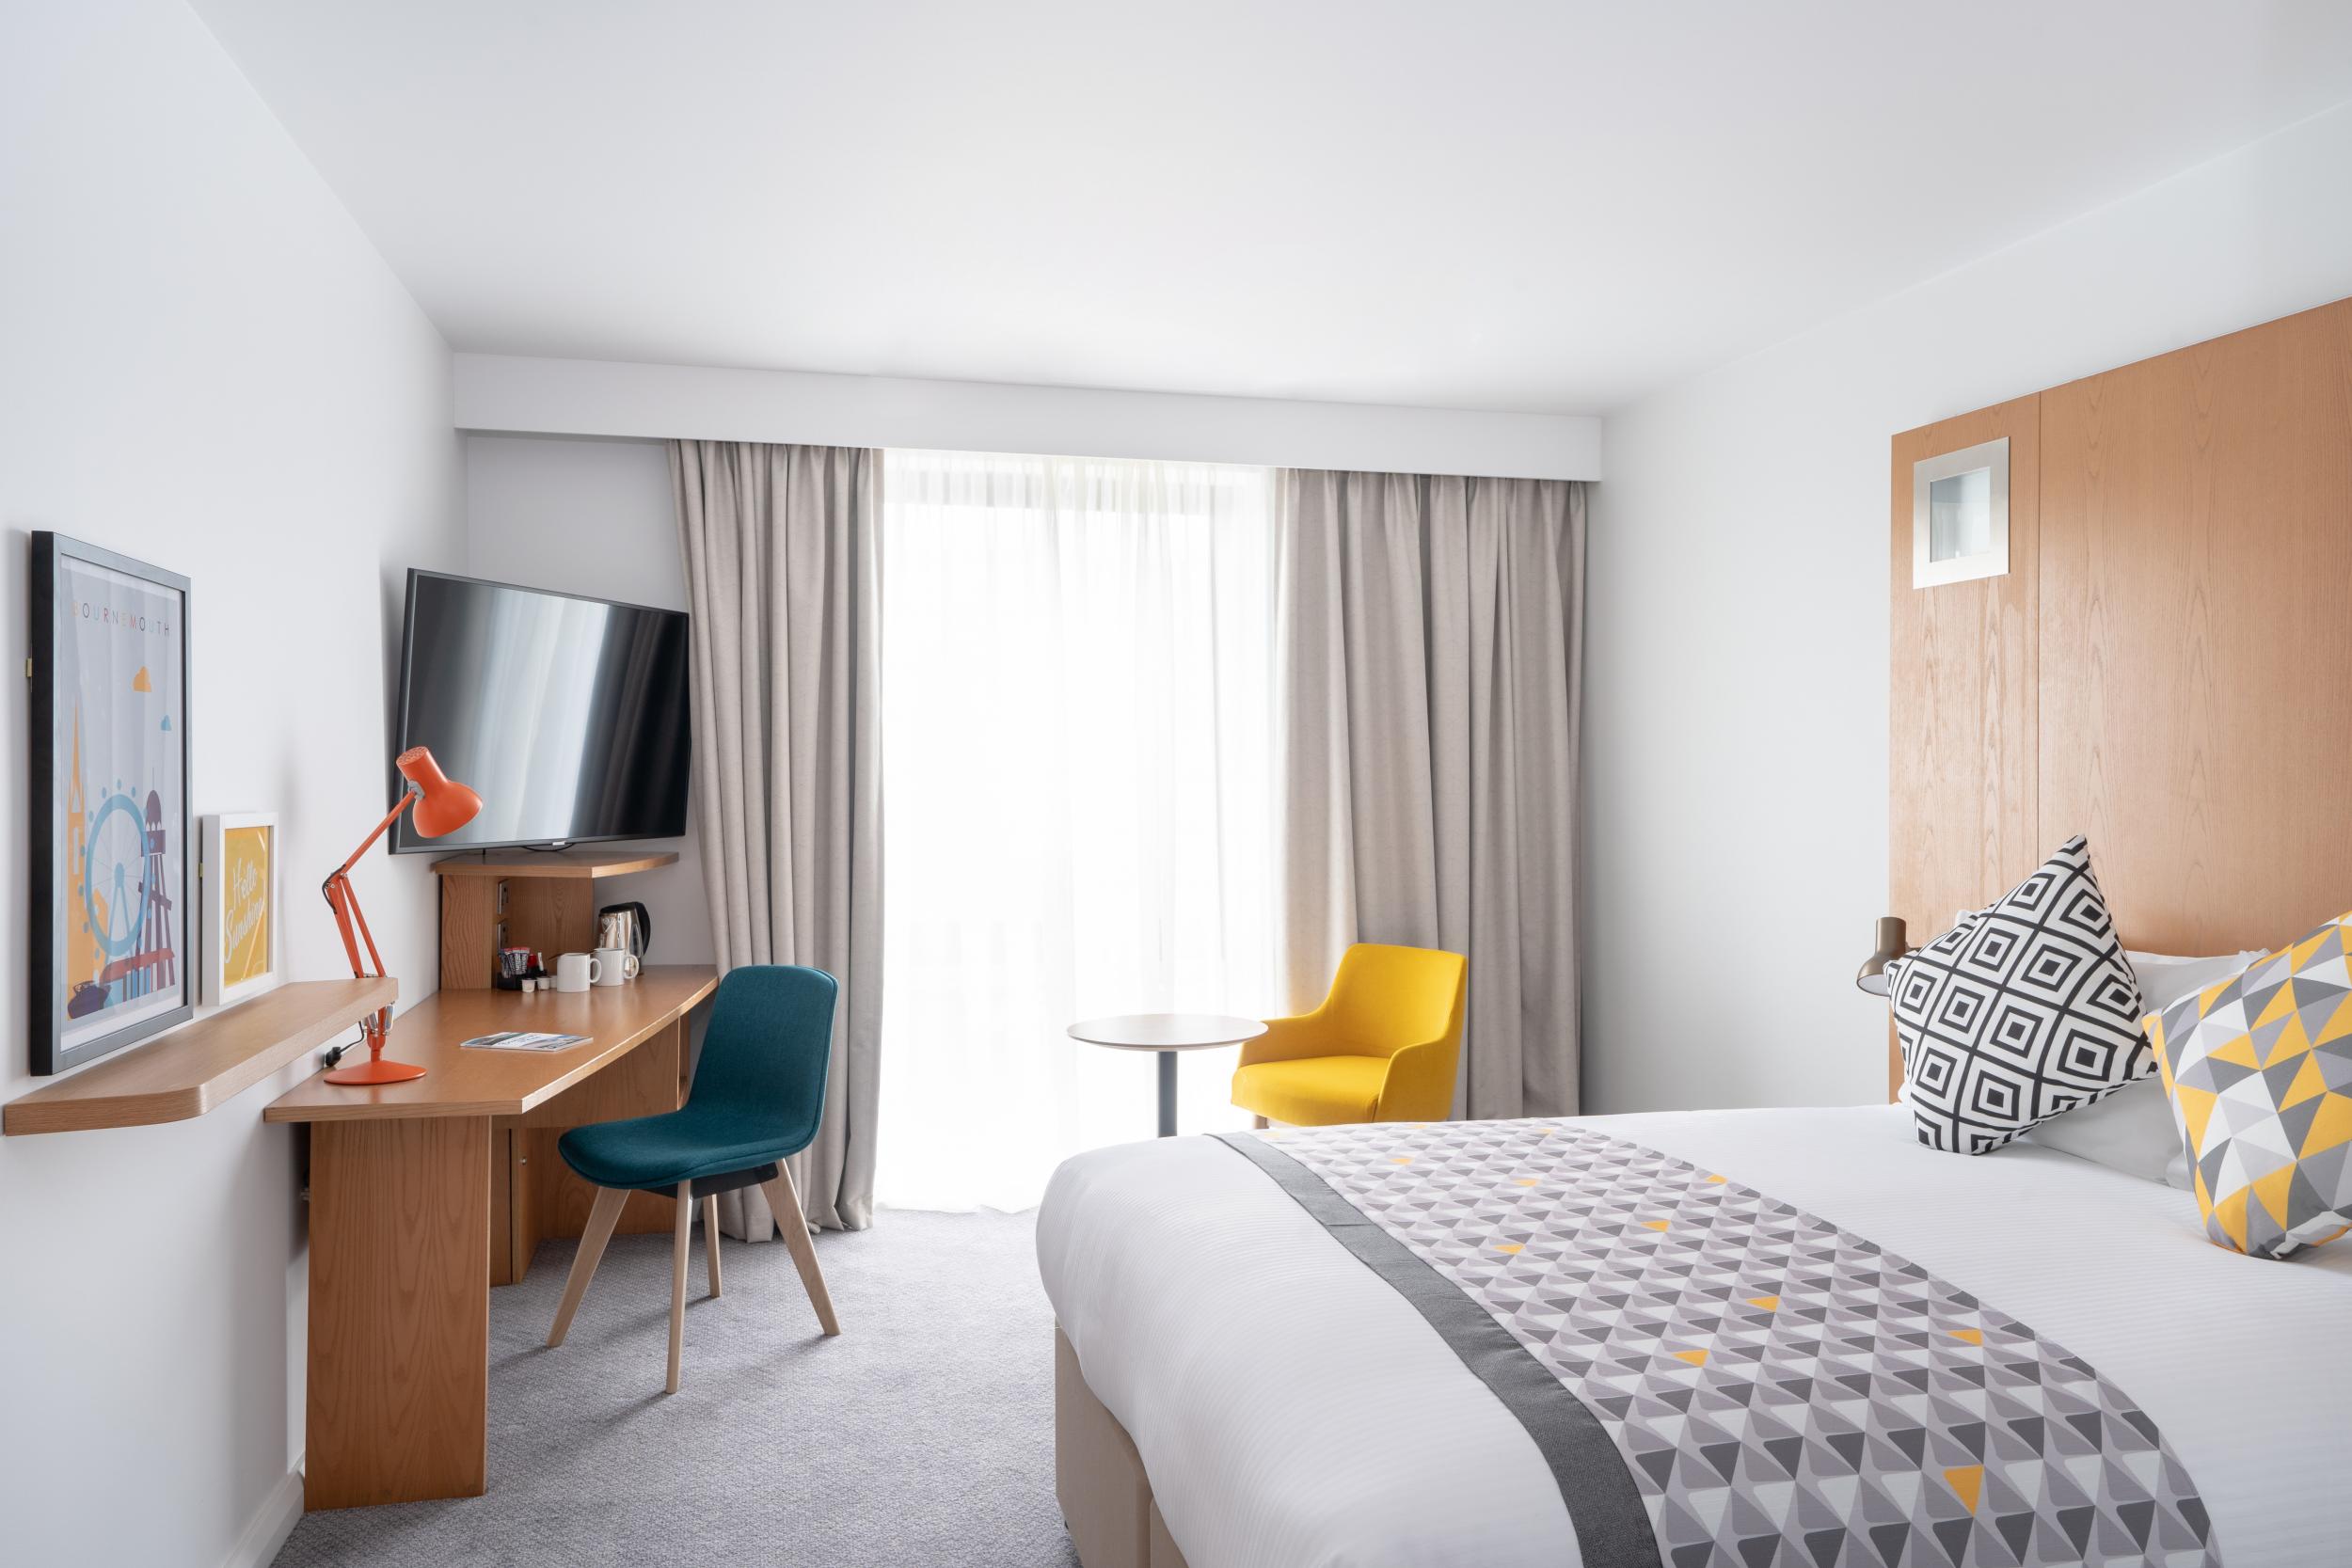 Pre or post-party, Holiday Inn offers cool and contemporary touches